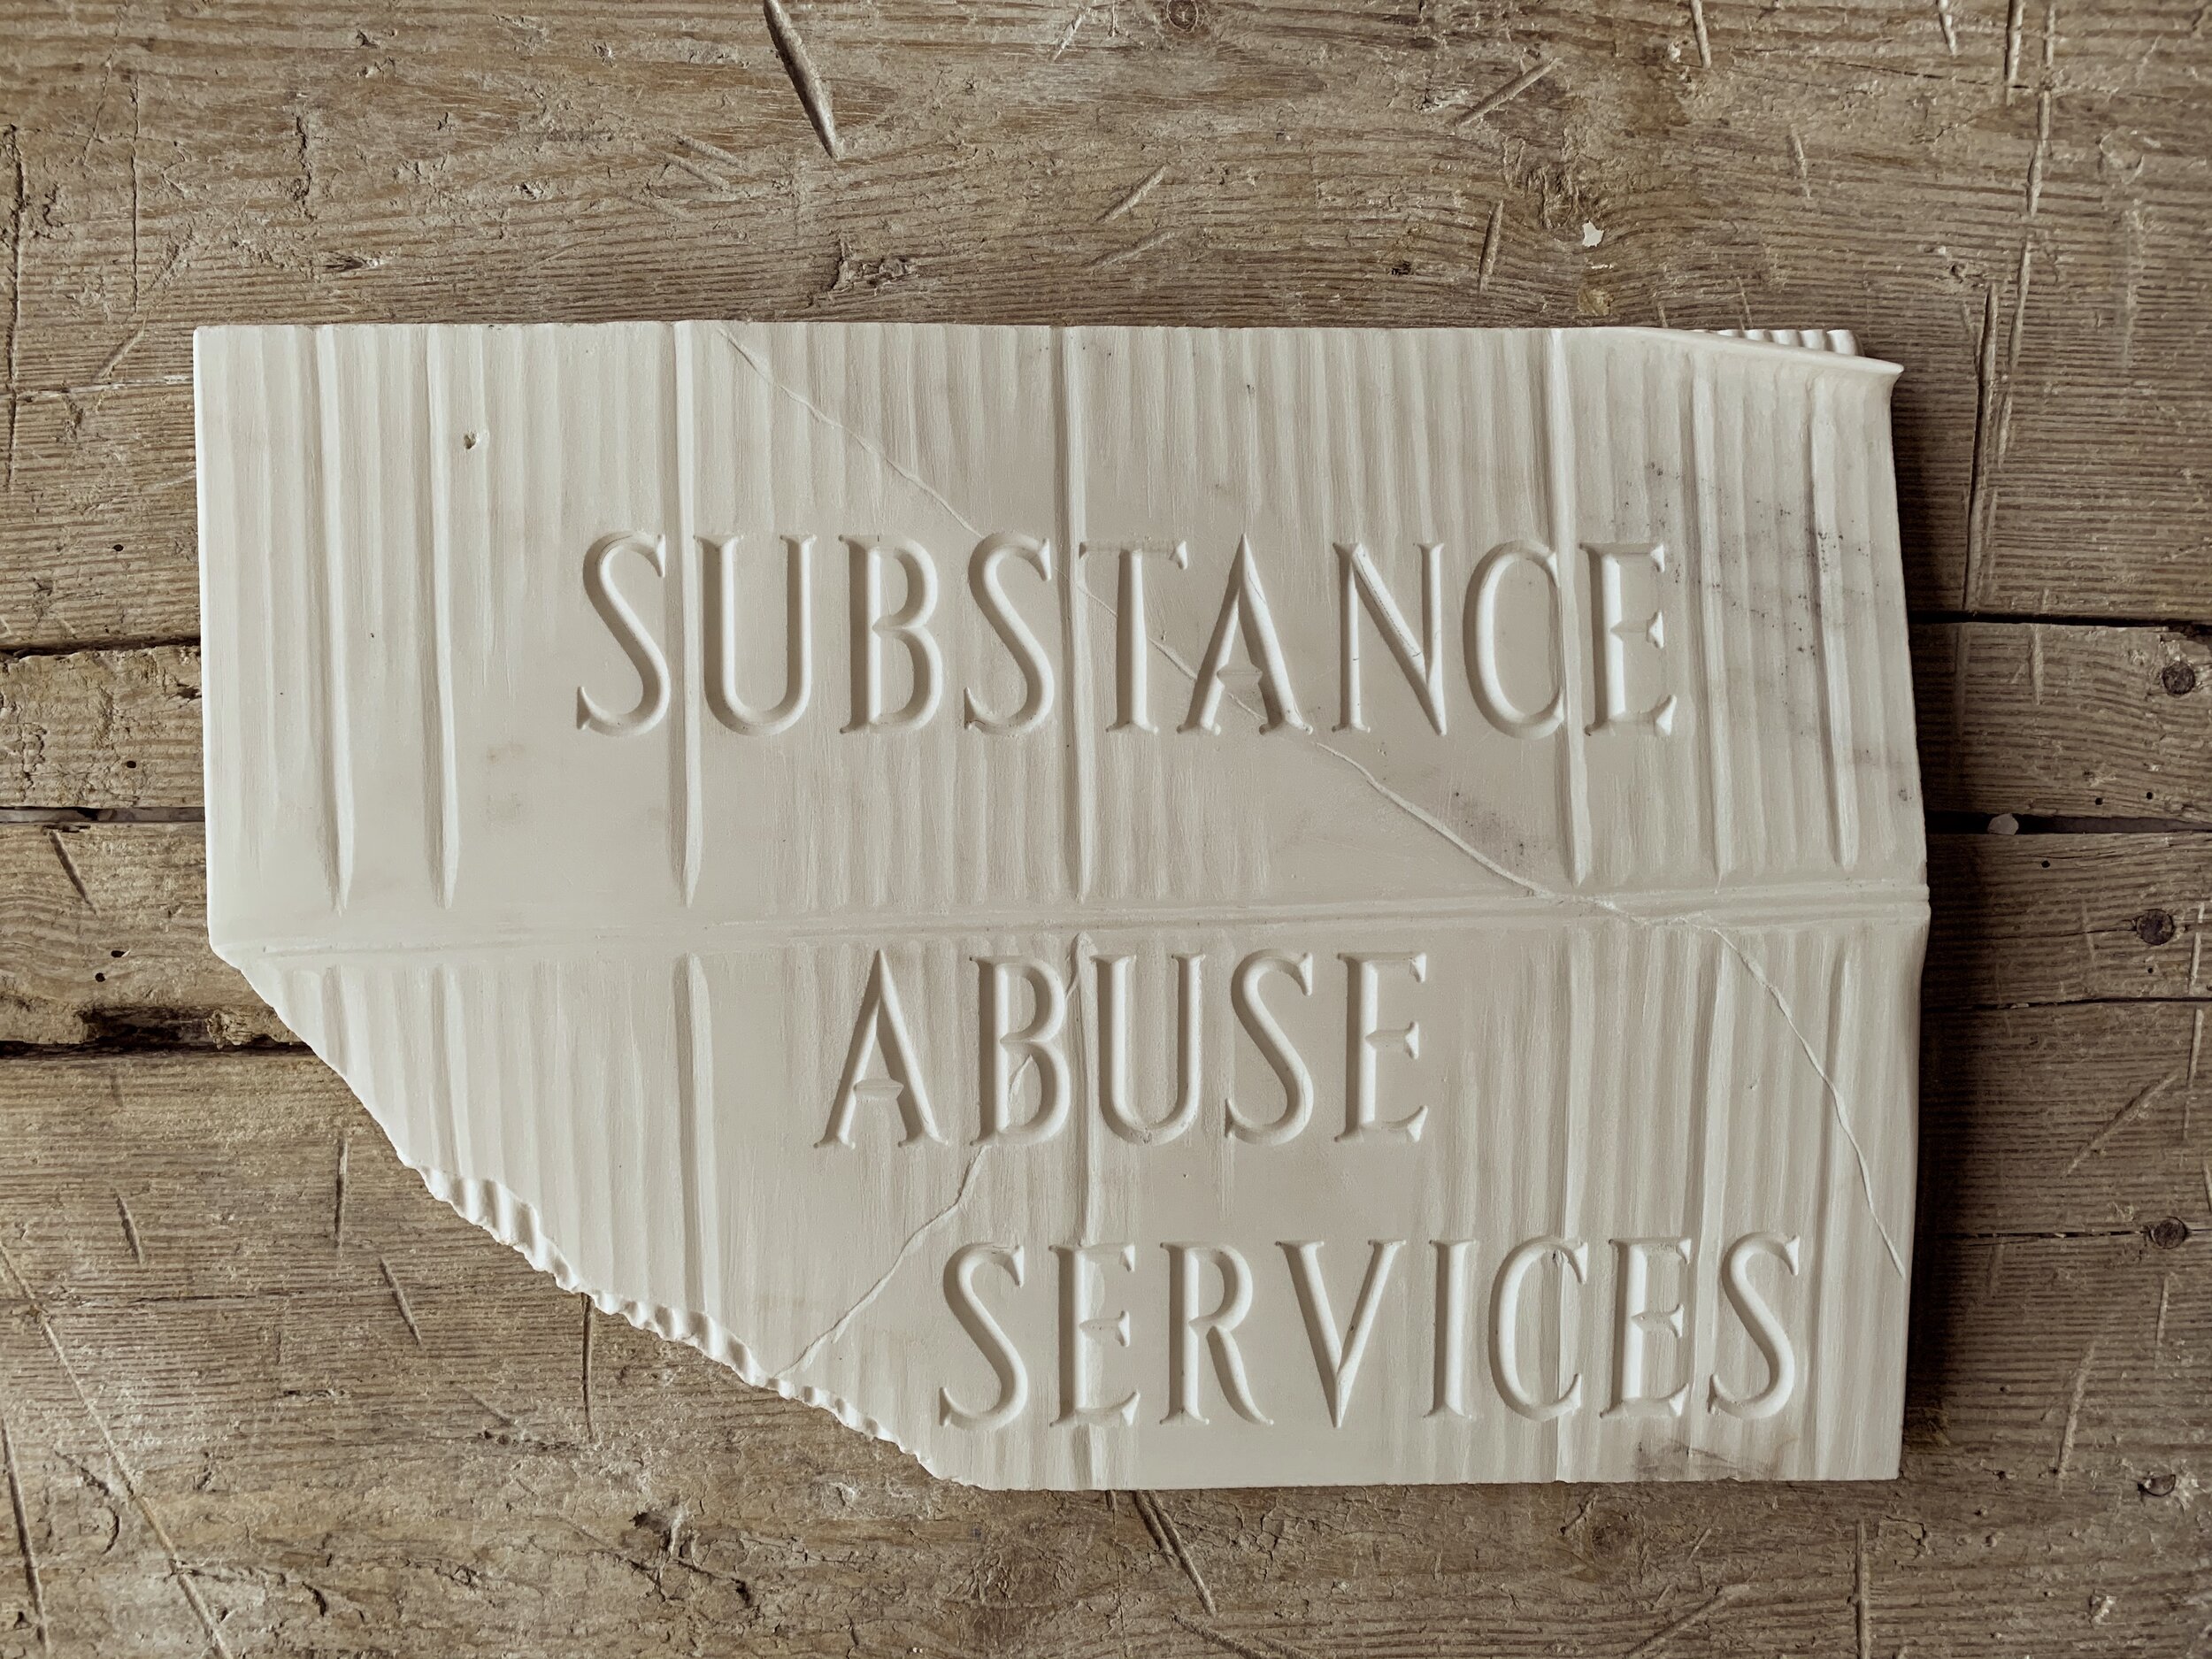 Substance Abuse Services.jpg